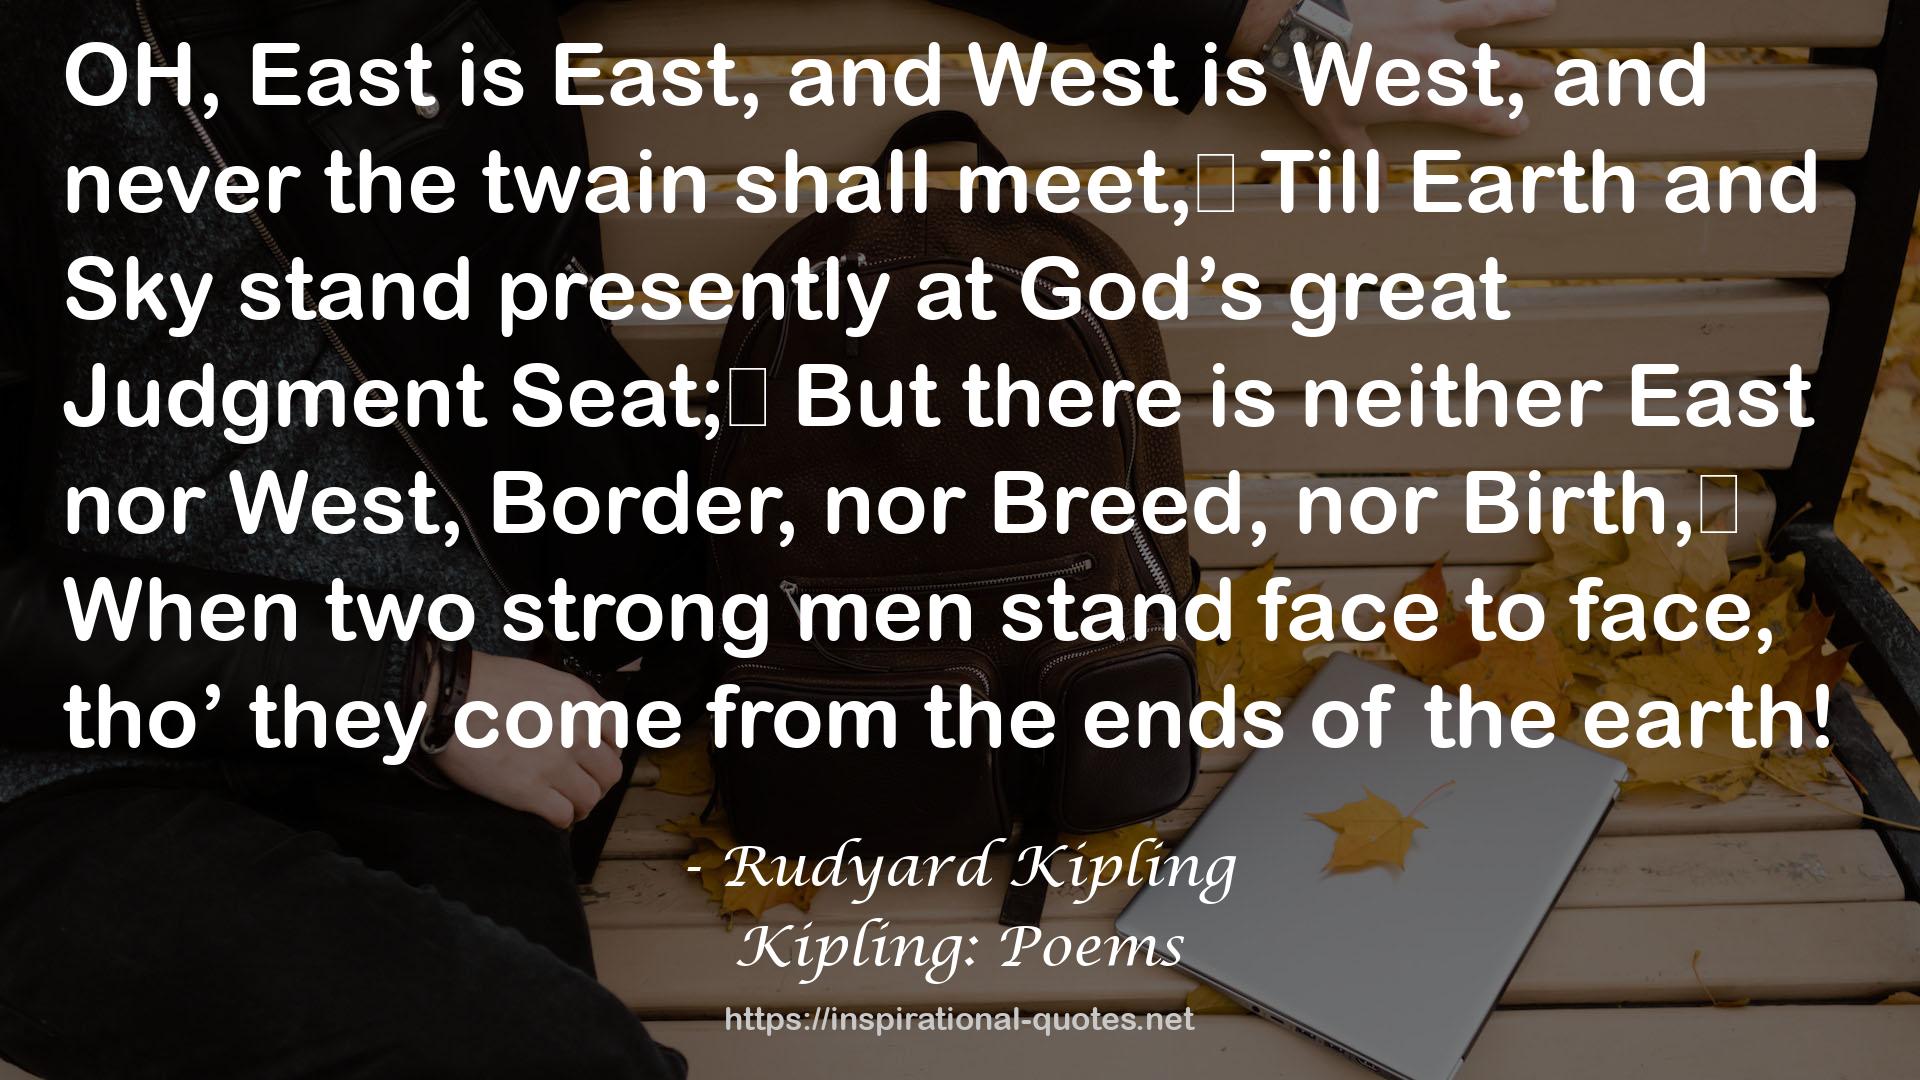 Kipling: Poems QUOTES